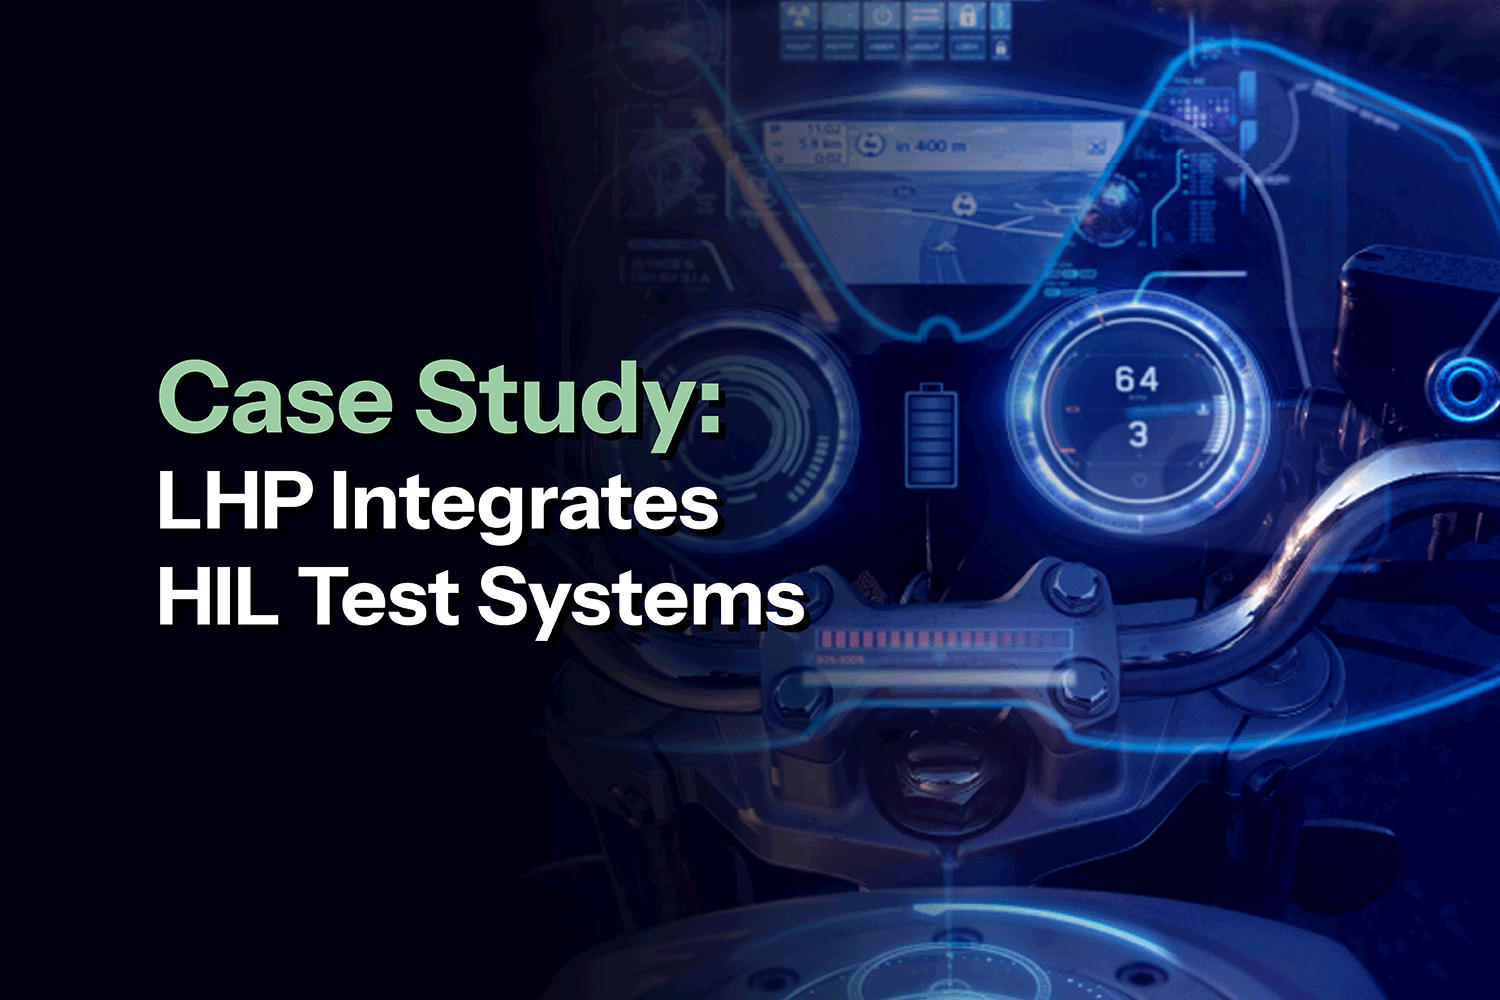 LSS-Knowledge-Center-Case-Study-LHP-Integrates-HIL-Test-Systems-Card-Images-02